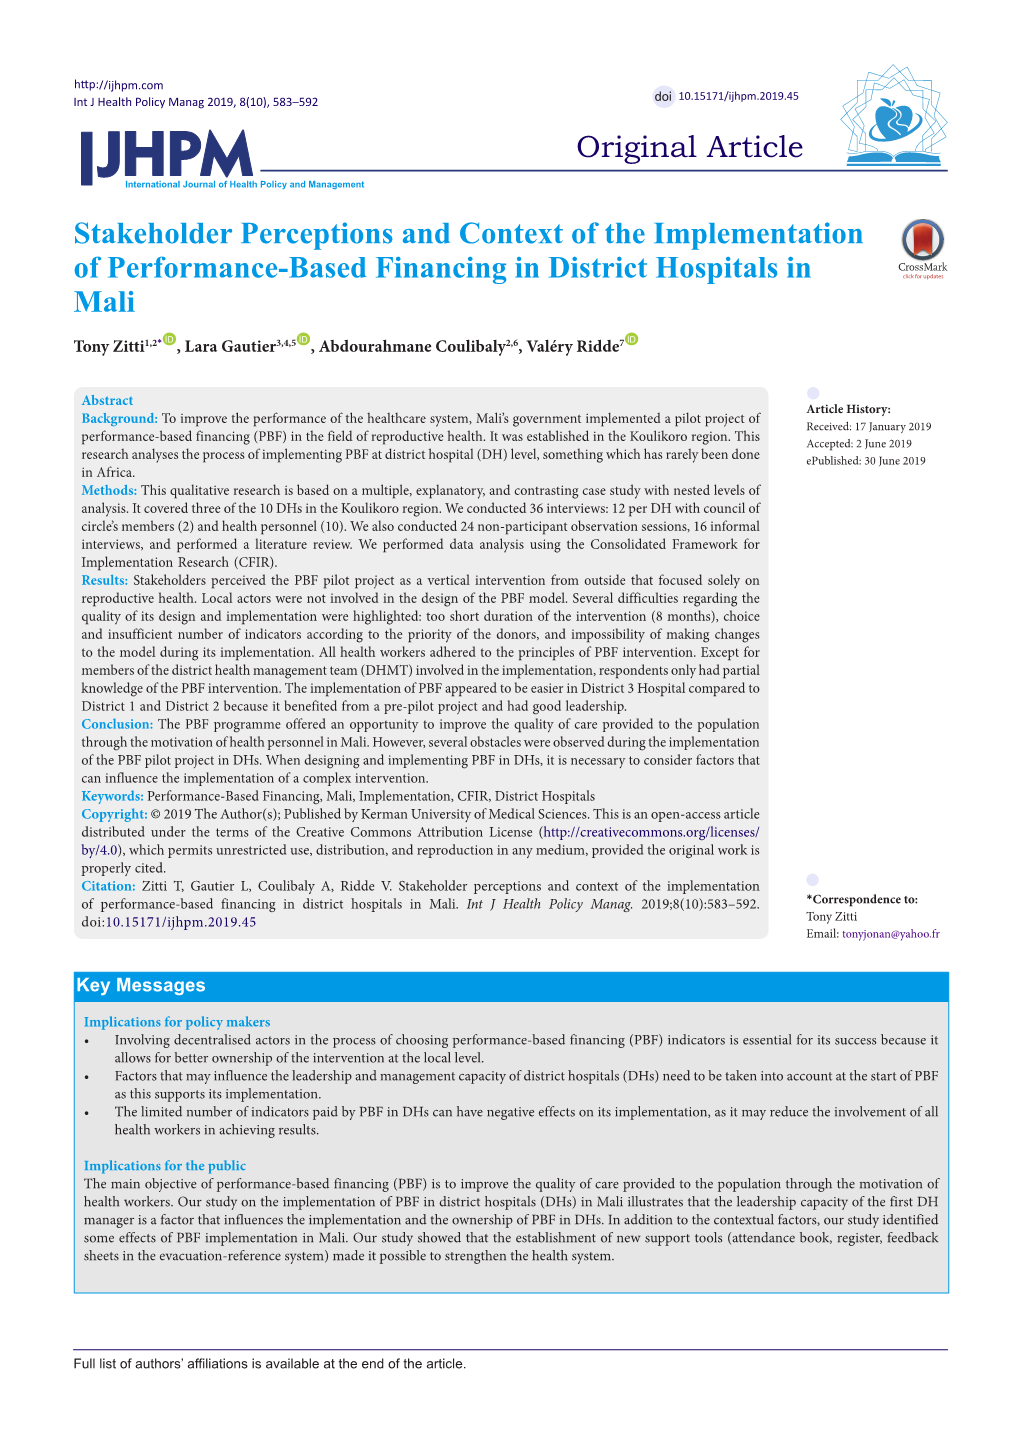 Stakeholder Perceptions and Context of the Implementation of Performance-Based Financing in District Hospitals in Mali